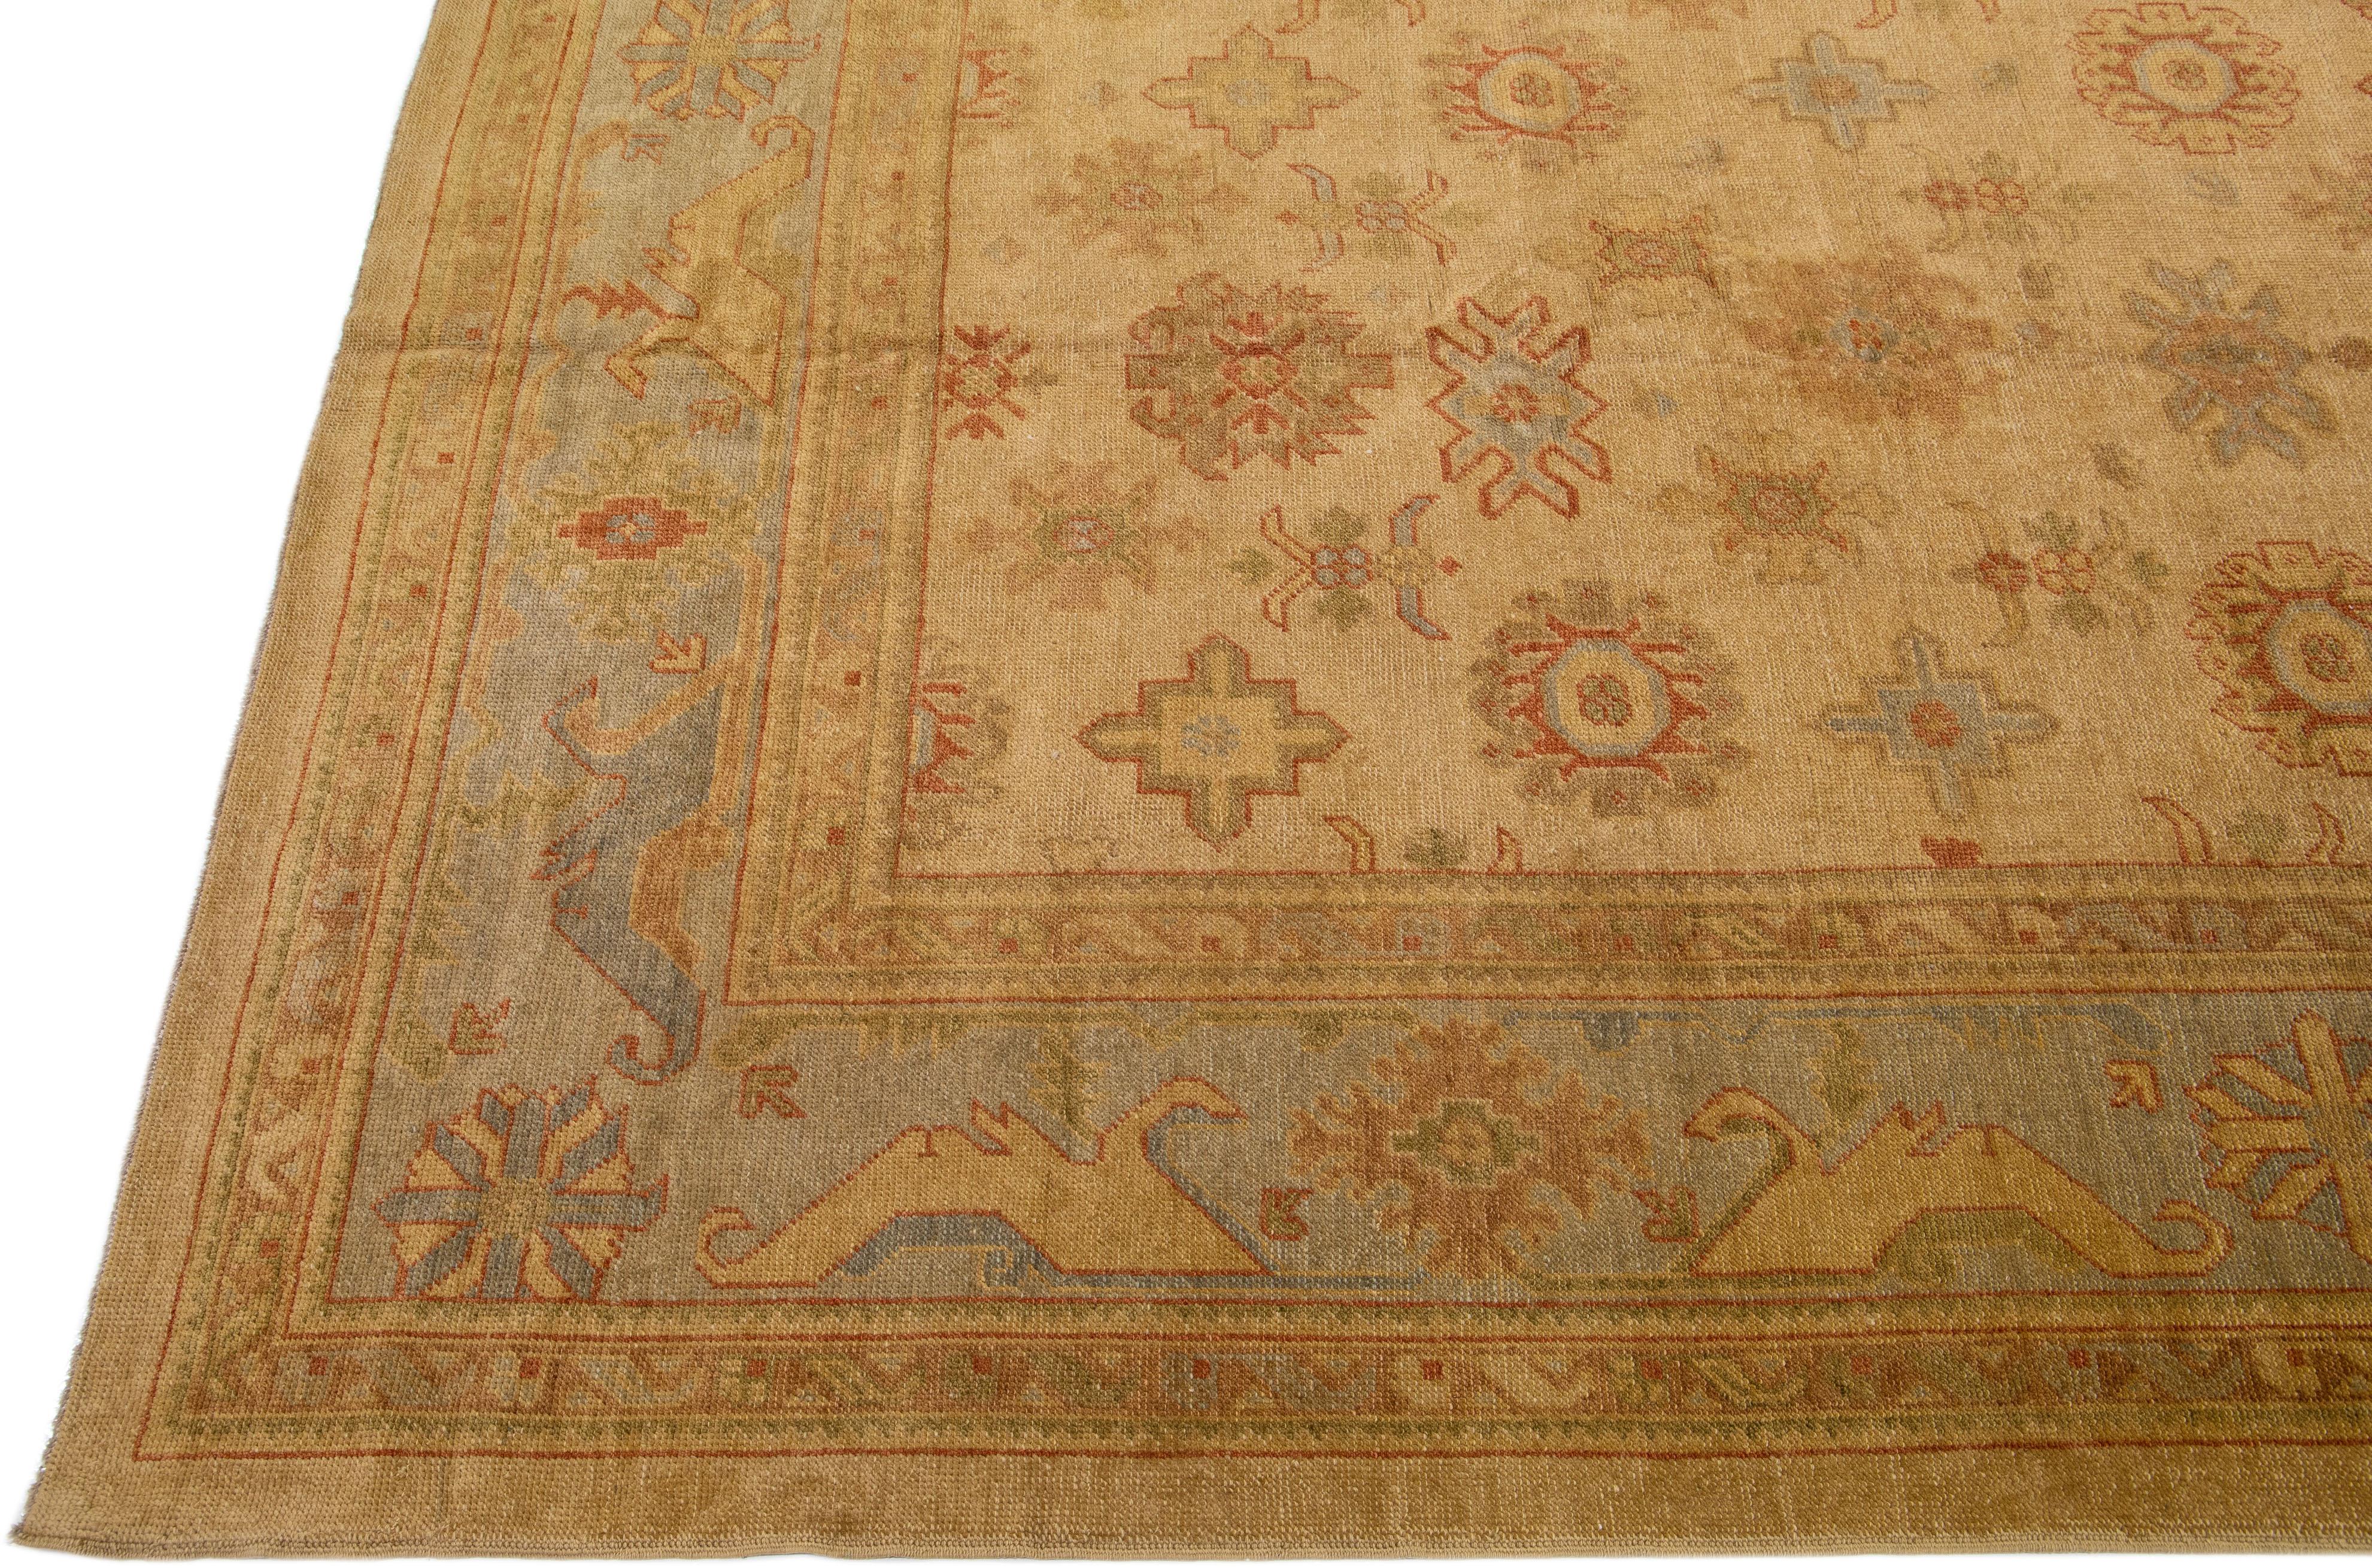 Beautiful modern Turkish Oushak hand-knotted wool rug with a brown color field. This rug has green and gray accents in a gorgeous large-scale floral pattern.

This rug measures: 13'8